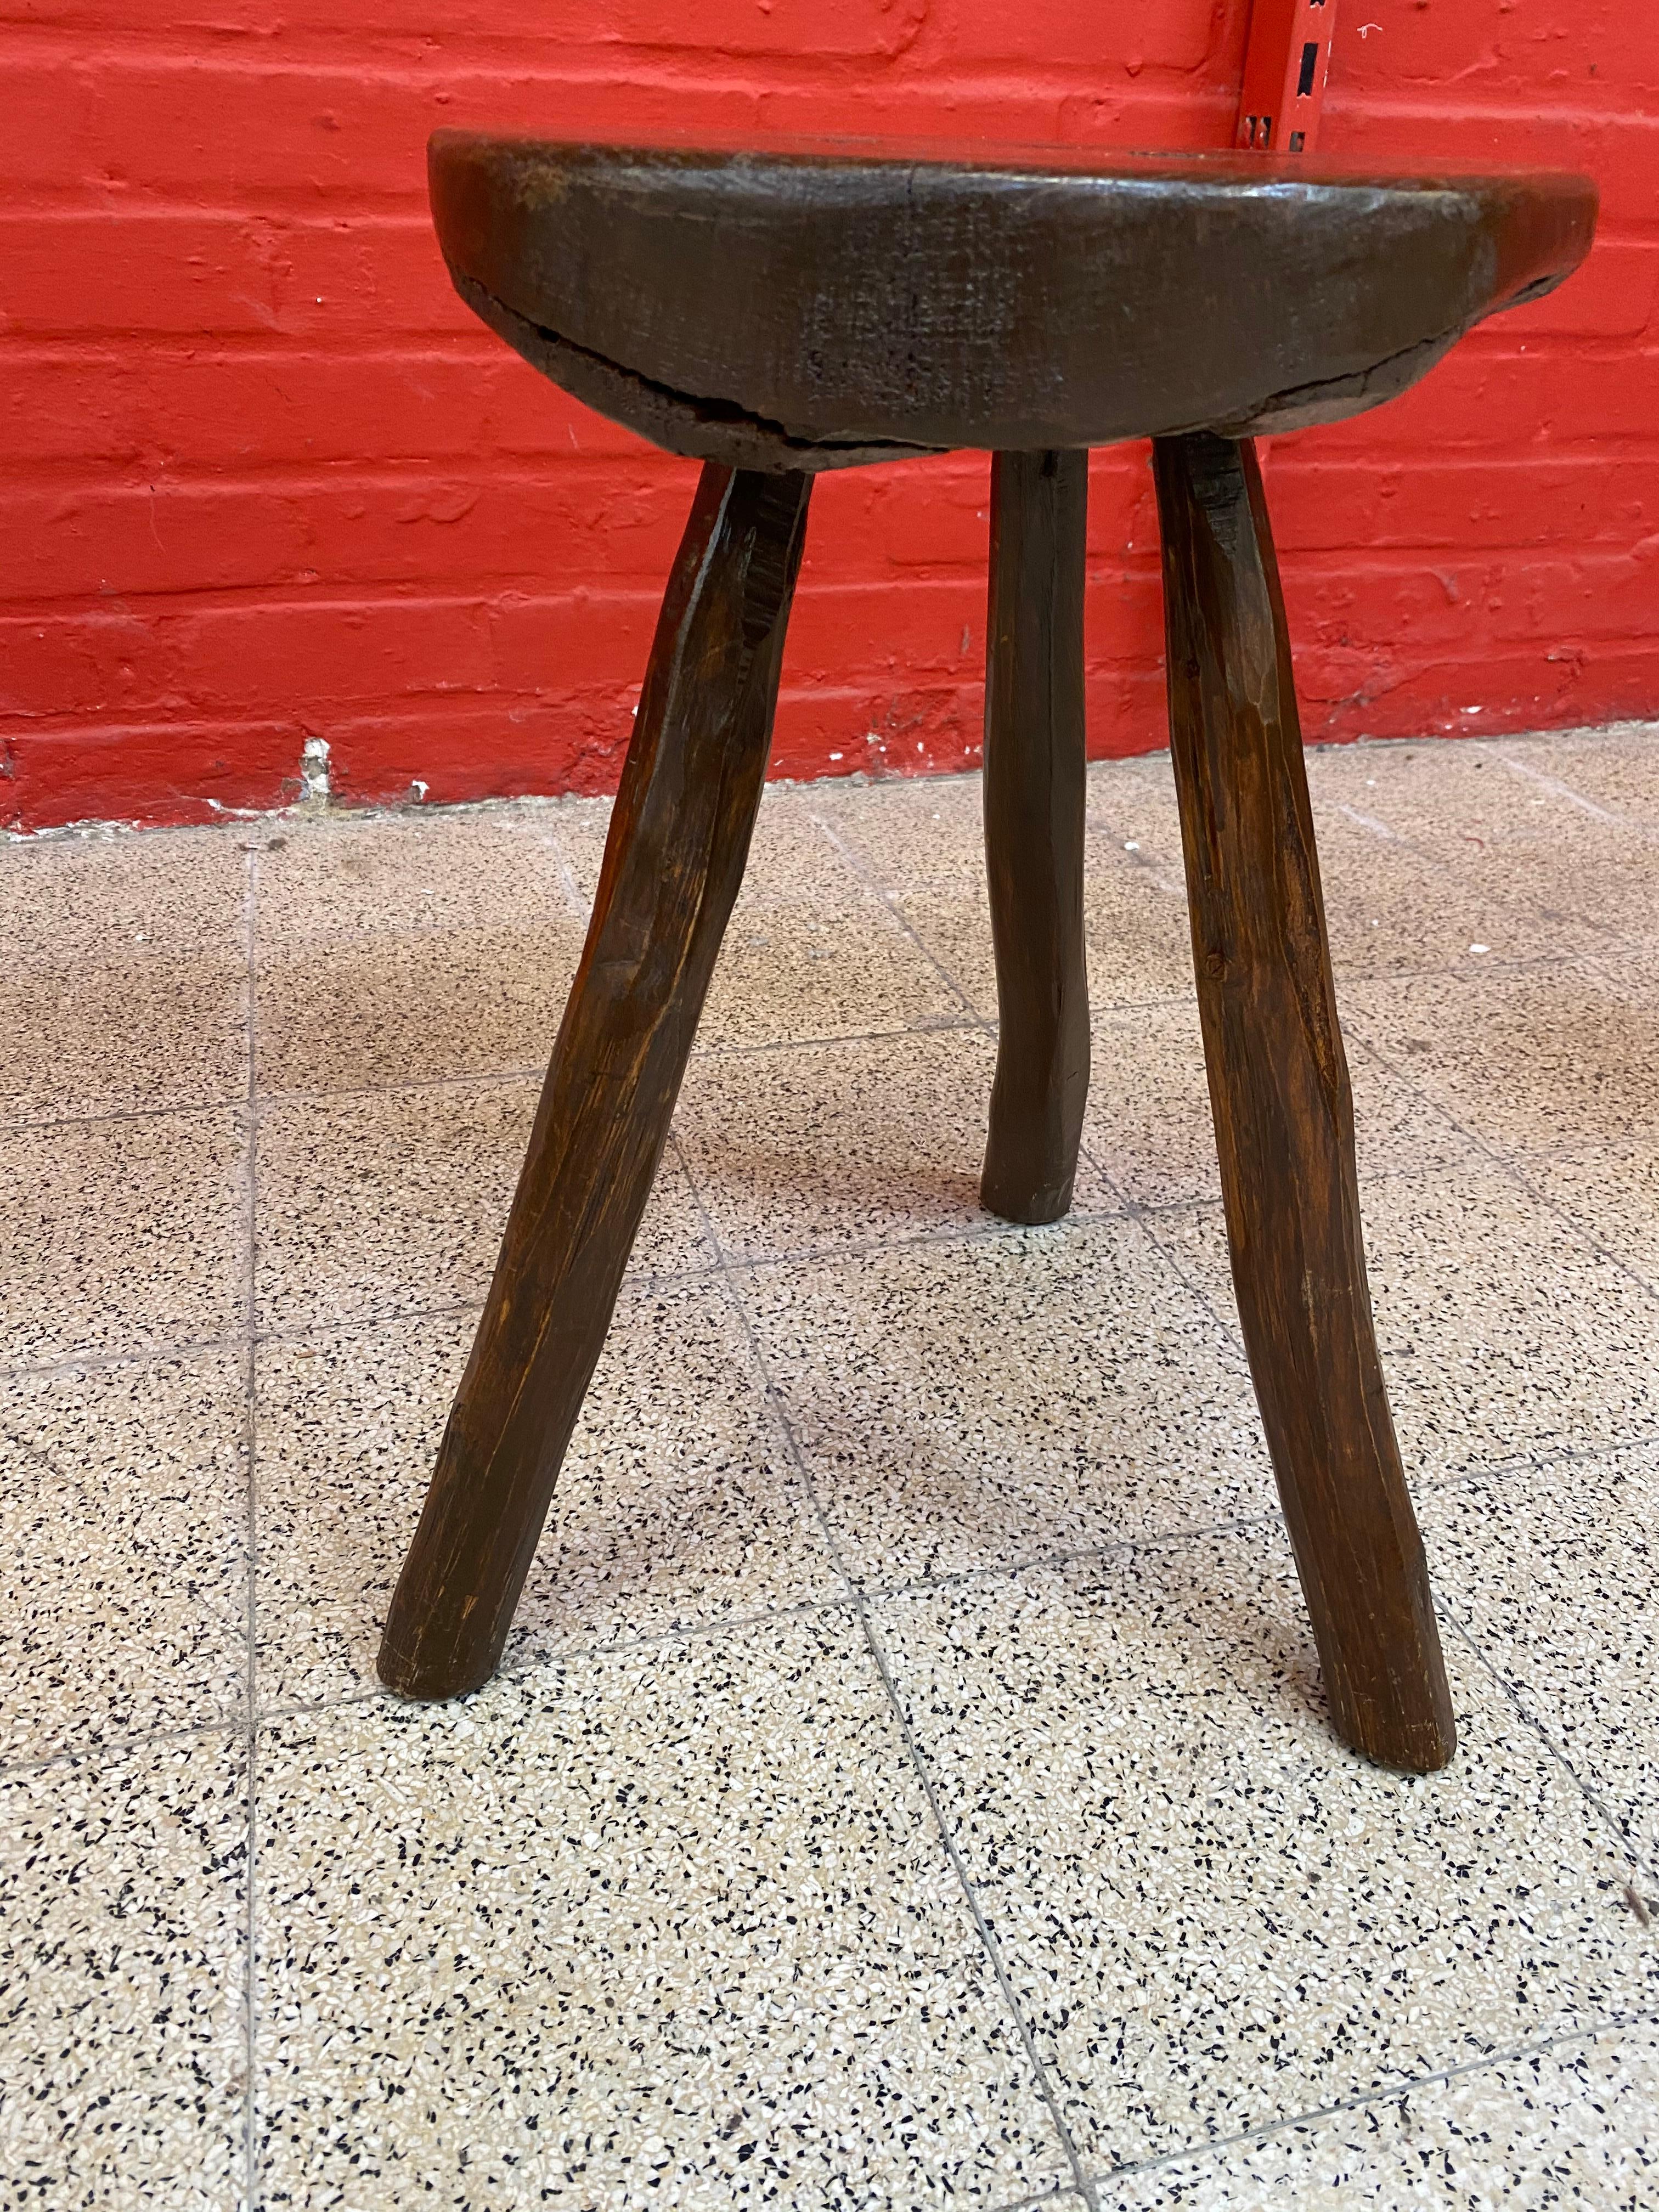 stool with hole in middle